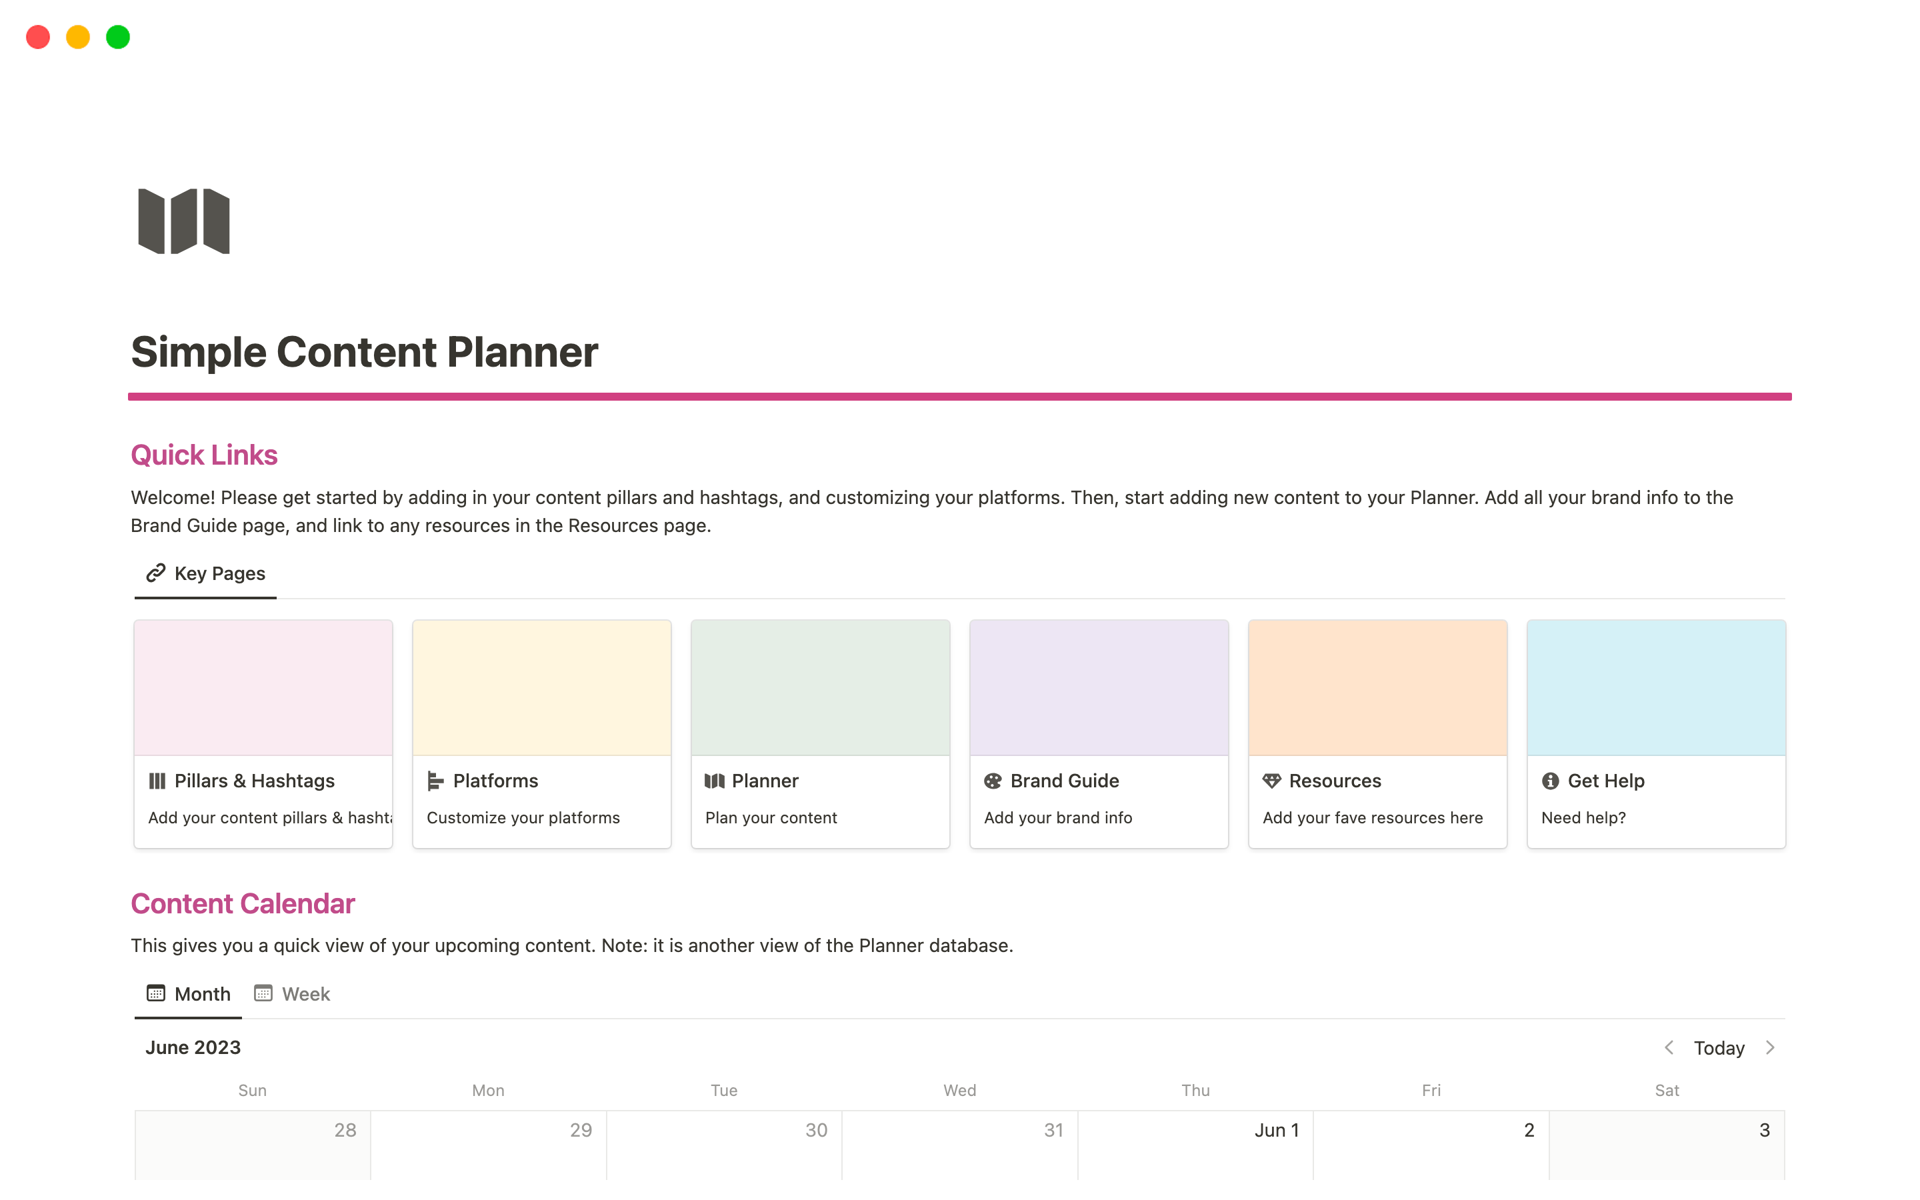 This content planner and calendar reduces content marketing overwhelm and gives you more time to focus on creating great content.